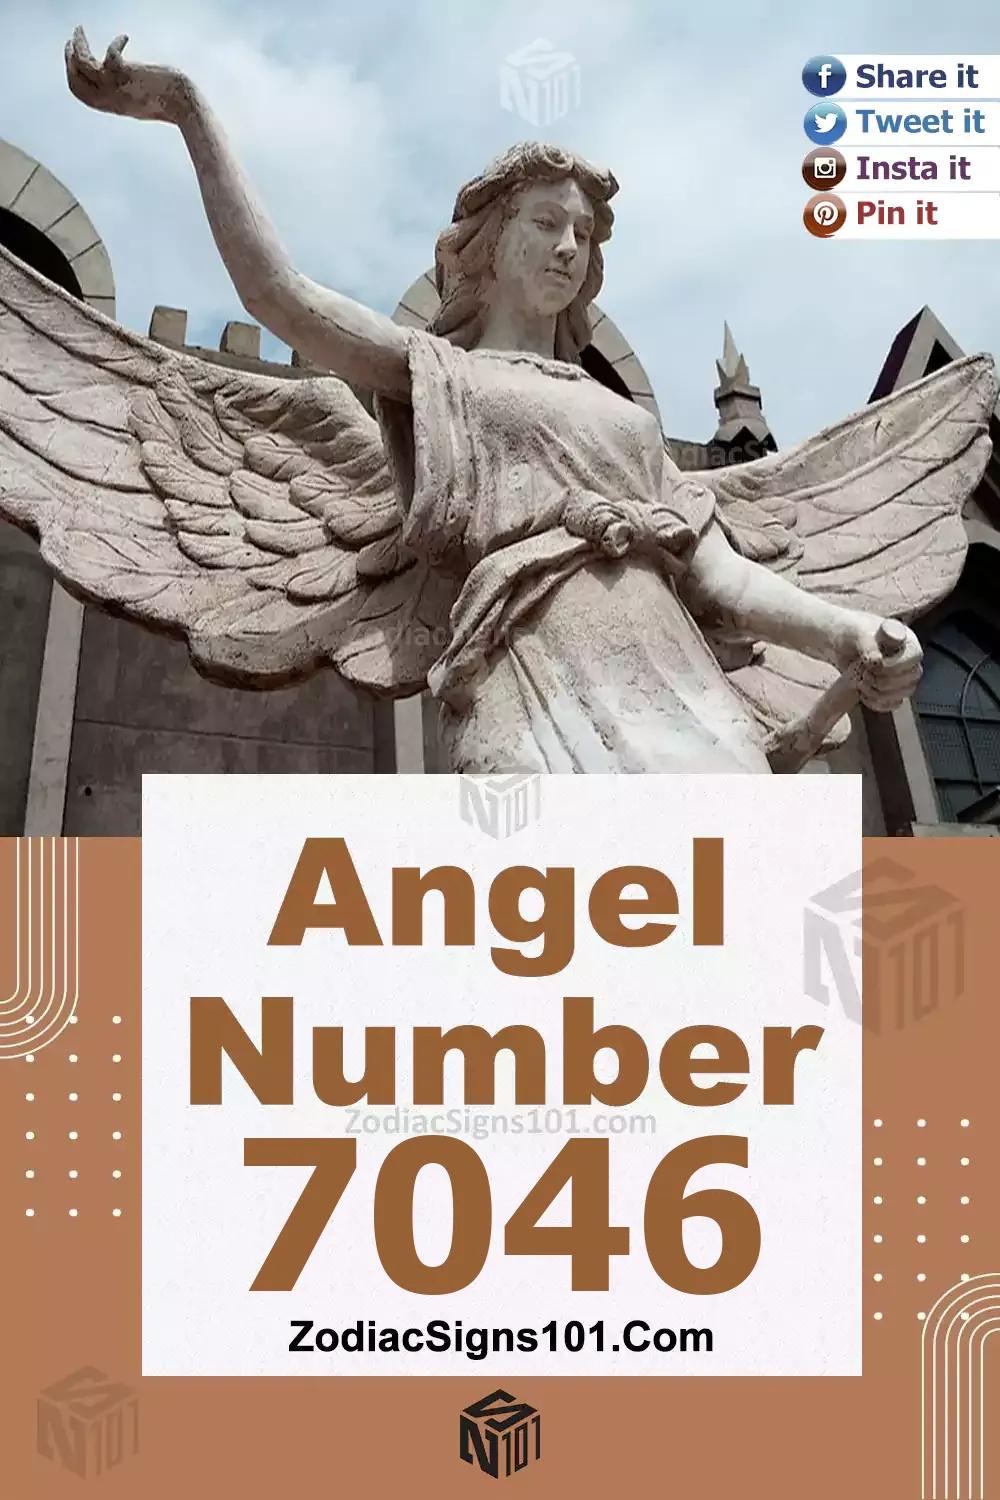 7046 Angel Number Meaning